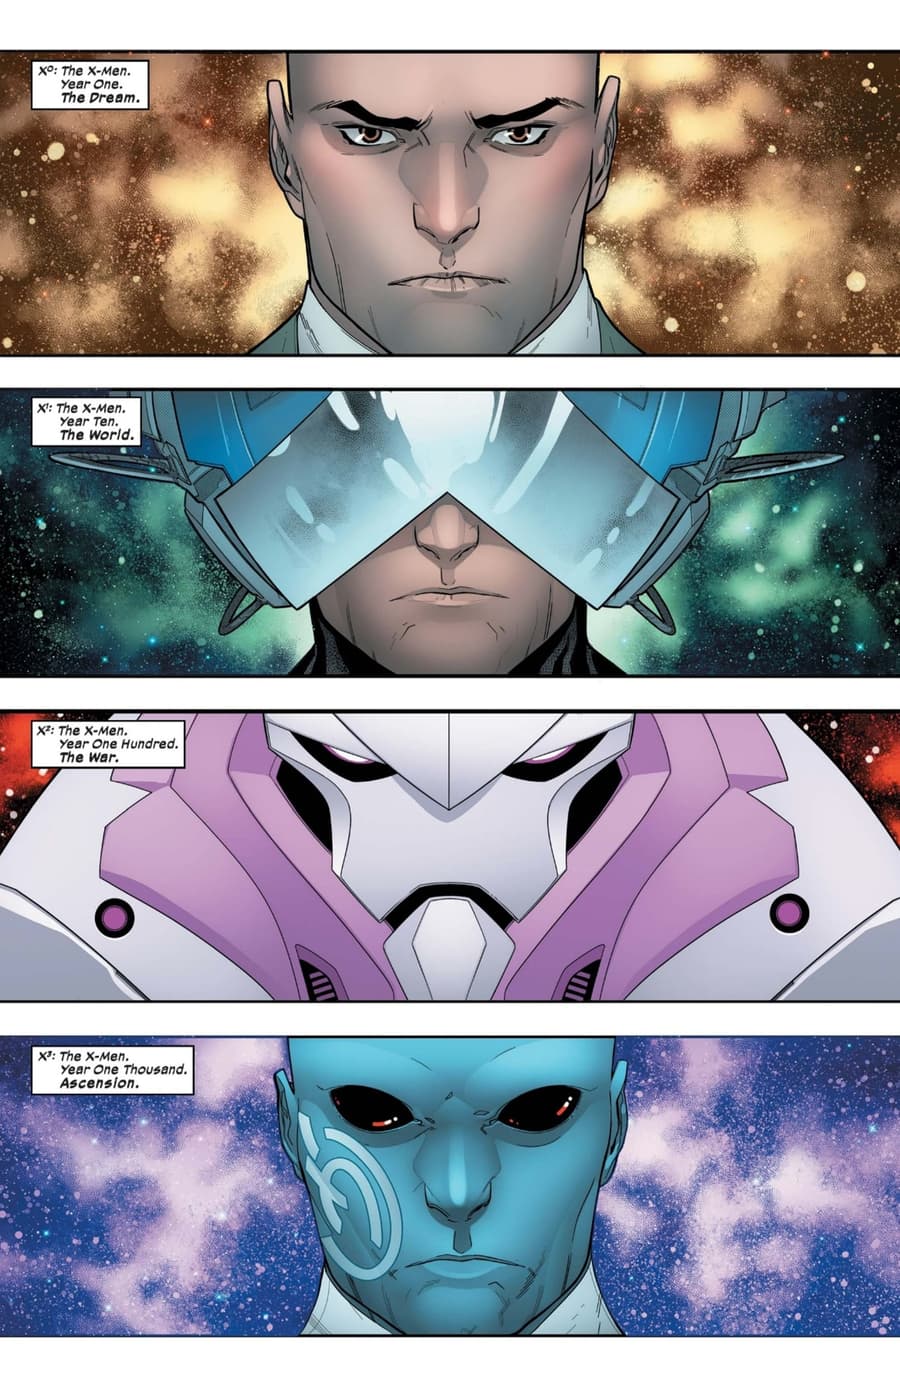 POWERS OF X (2019) #1 page by Jonathan Hickman and R.B. Silva